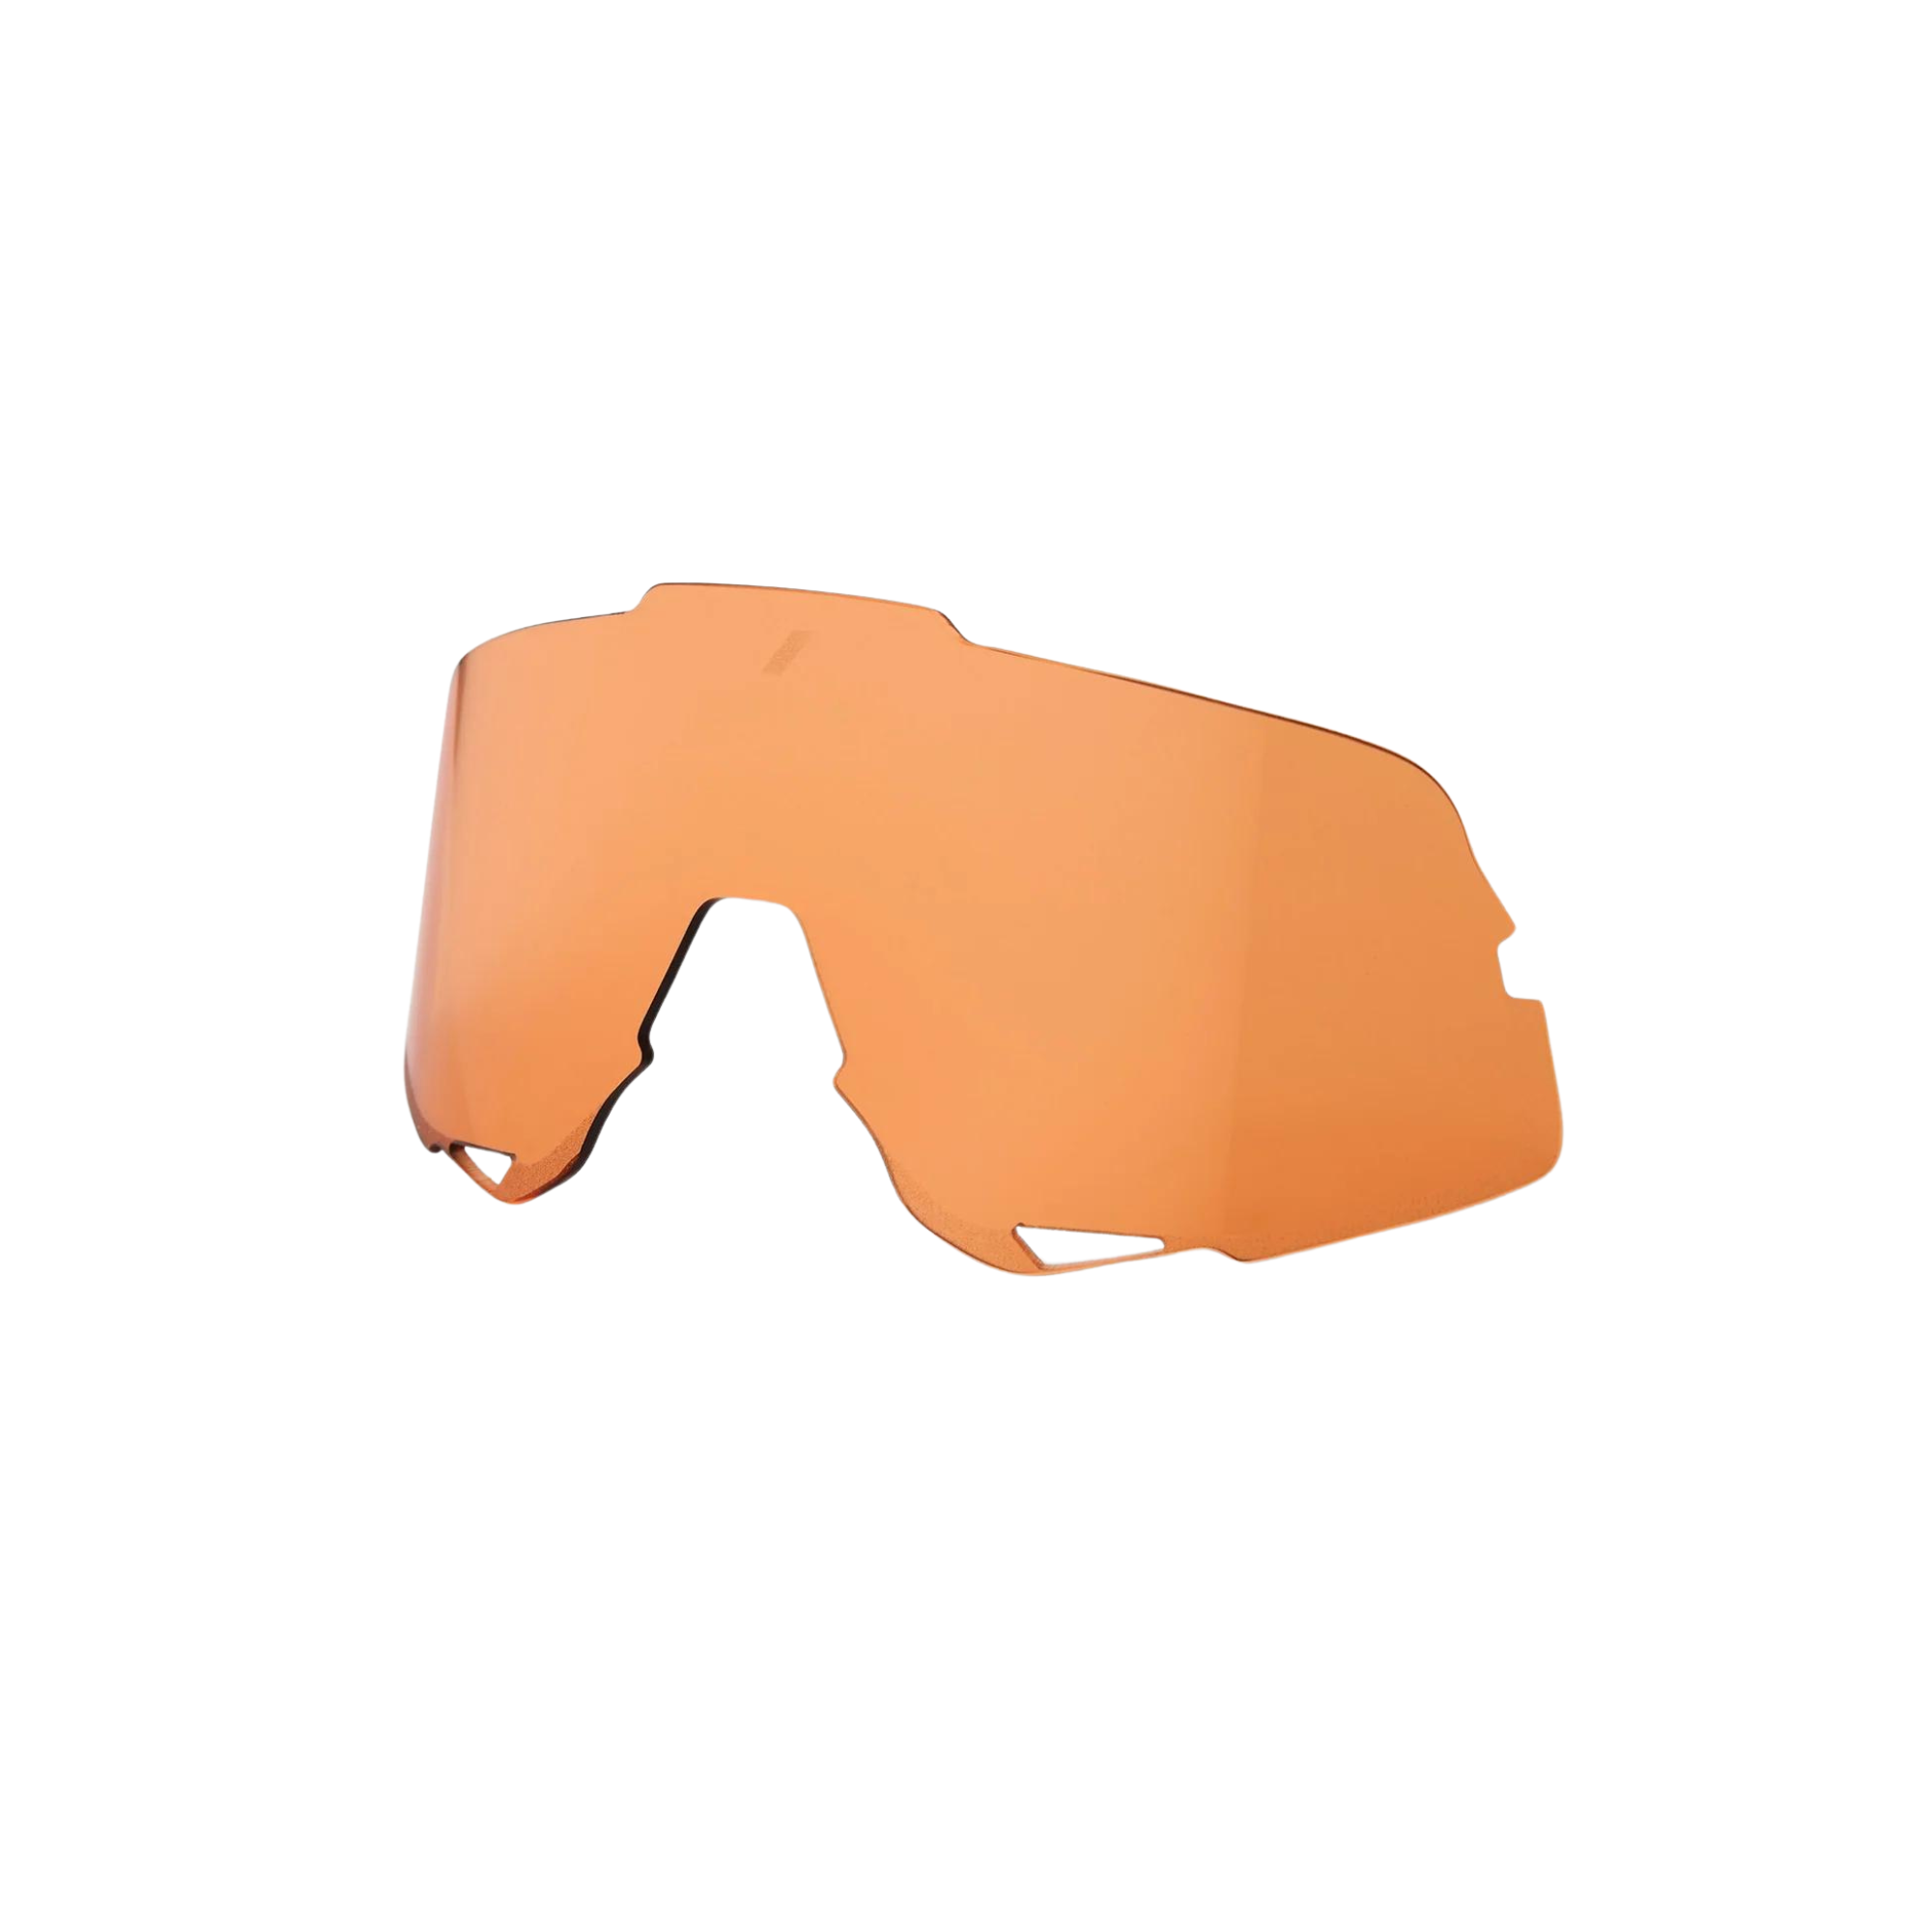 100% GLENDALE Replacement Lens - Persimmon